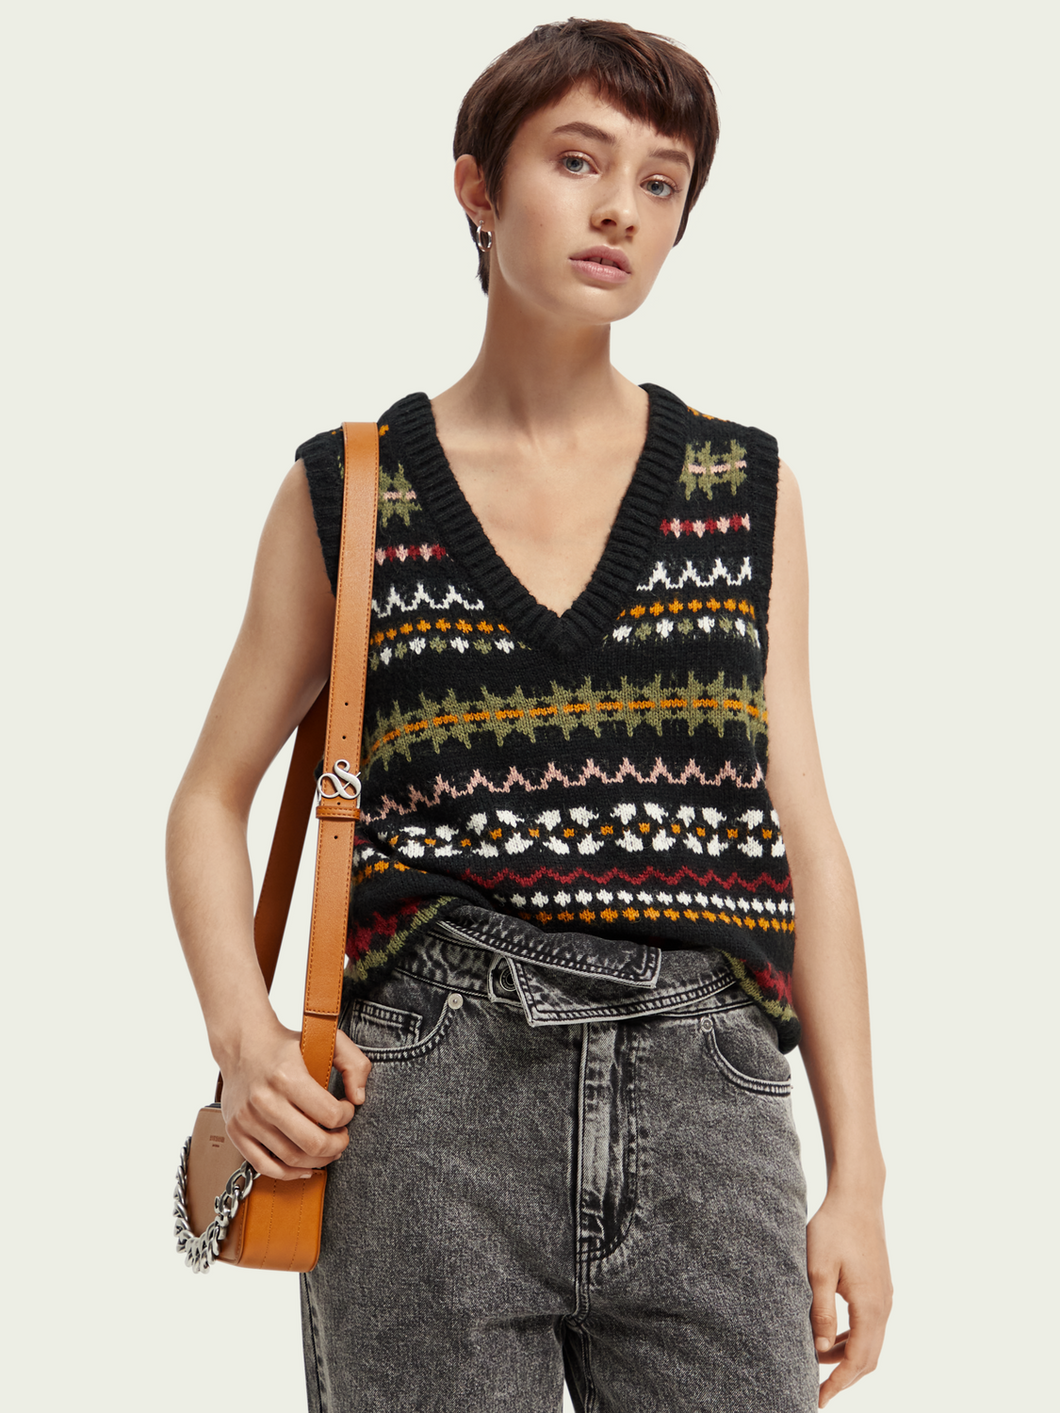 Scotch & Soda Fair Isle V-neck Relaxed Fit Knitted Vest in Black/Multi - FINAL SALE